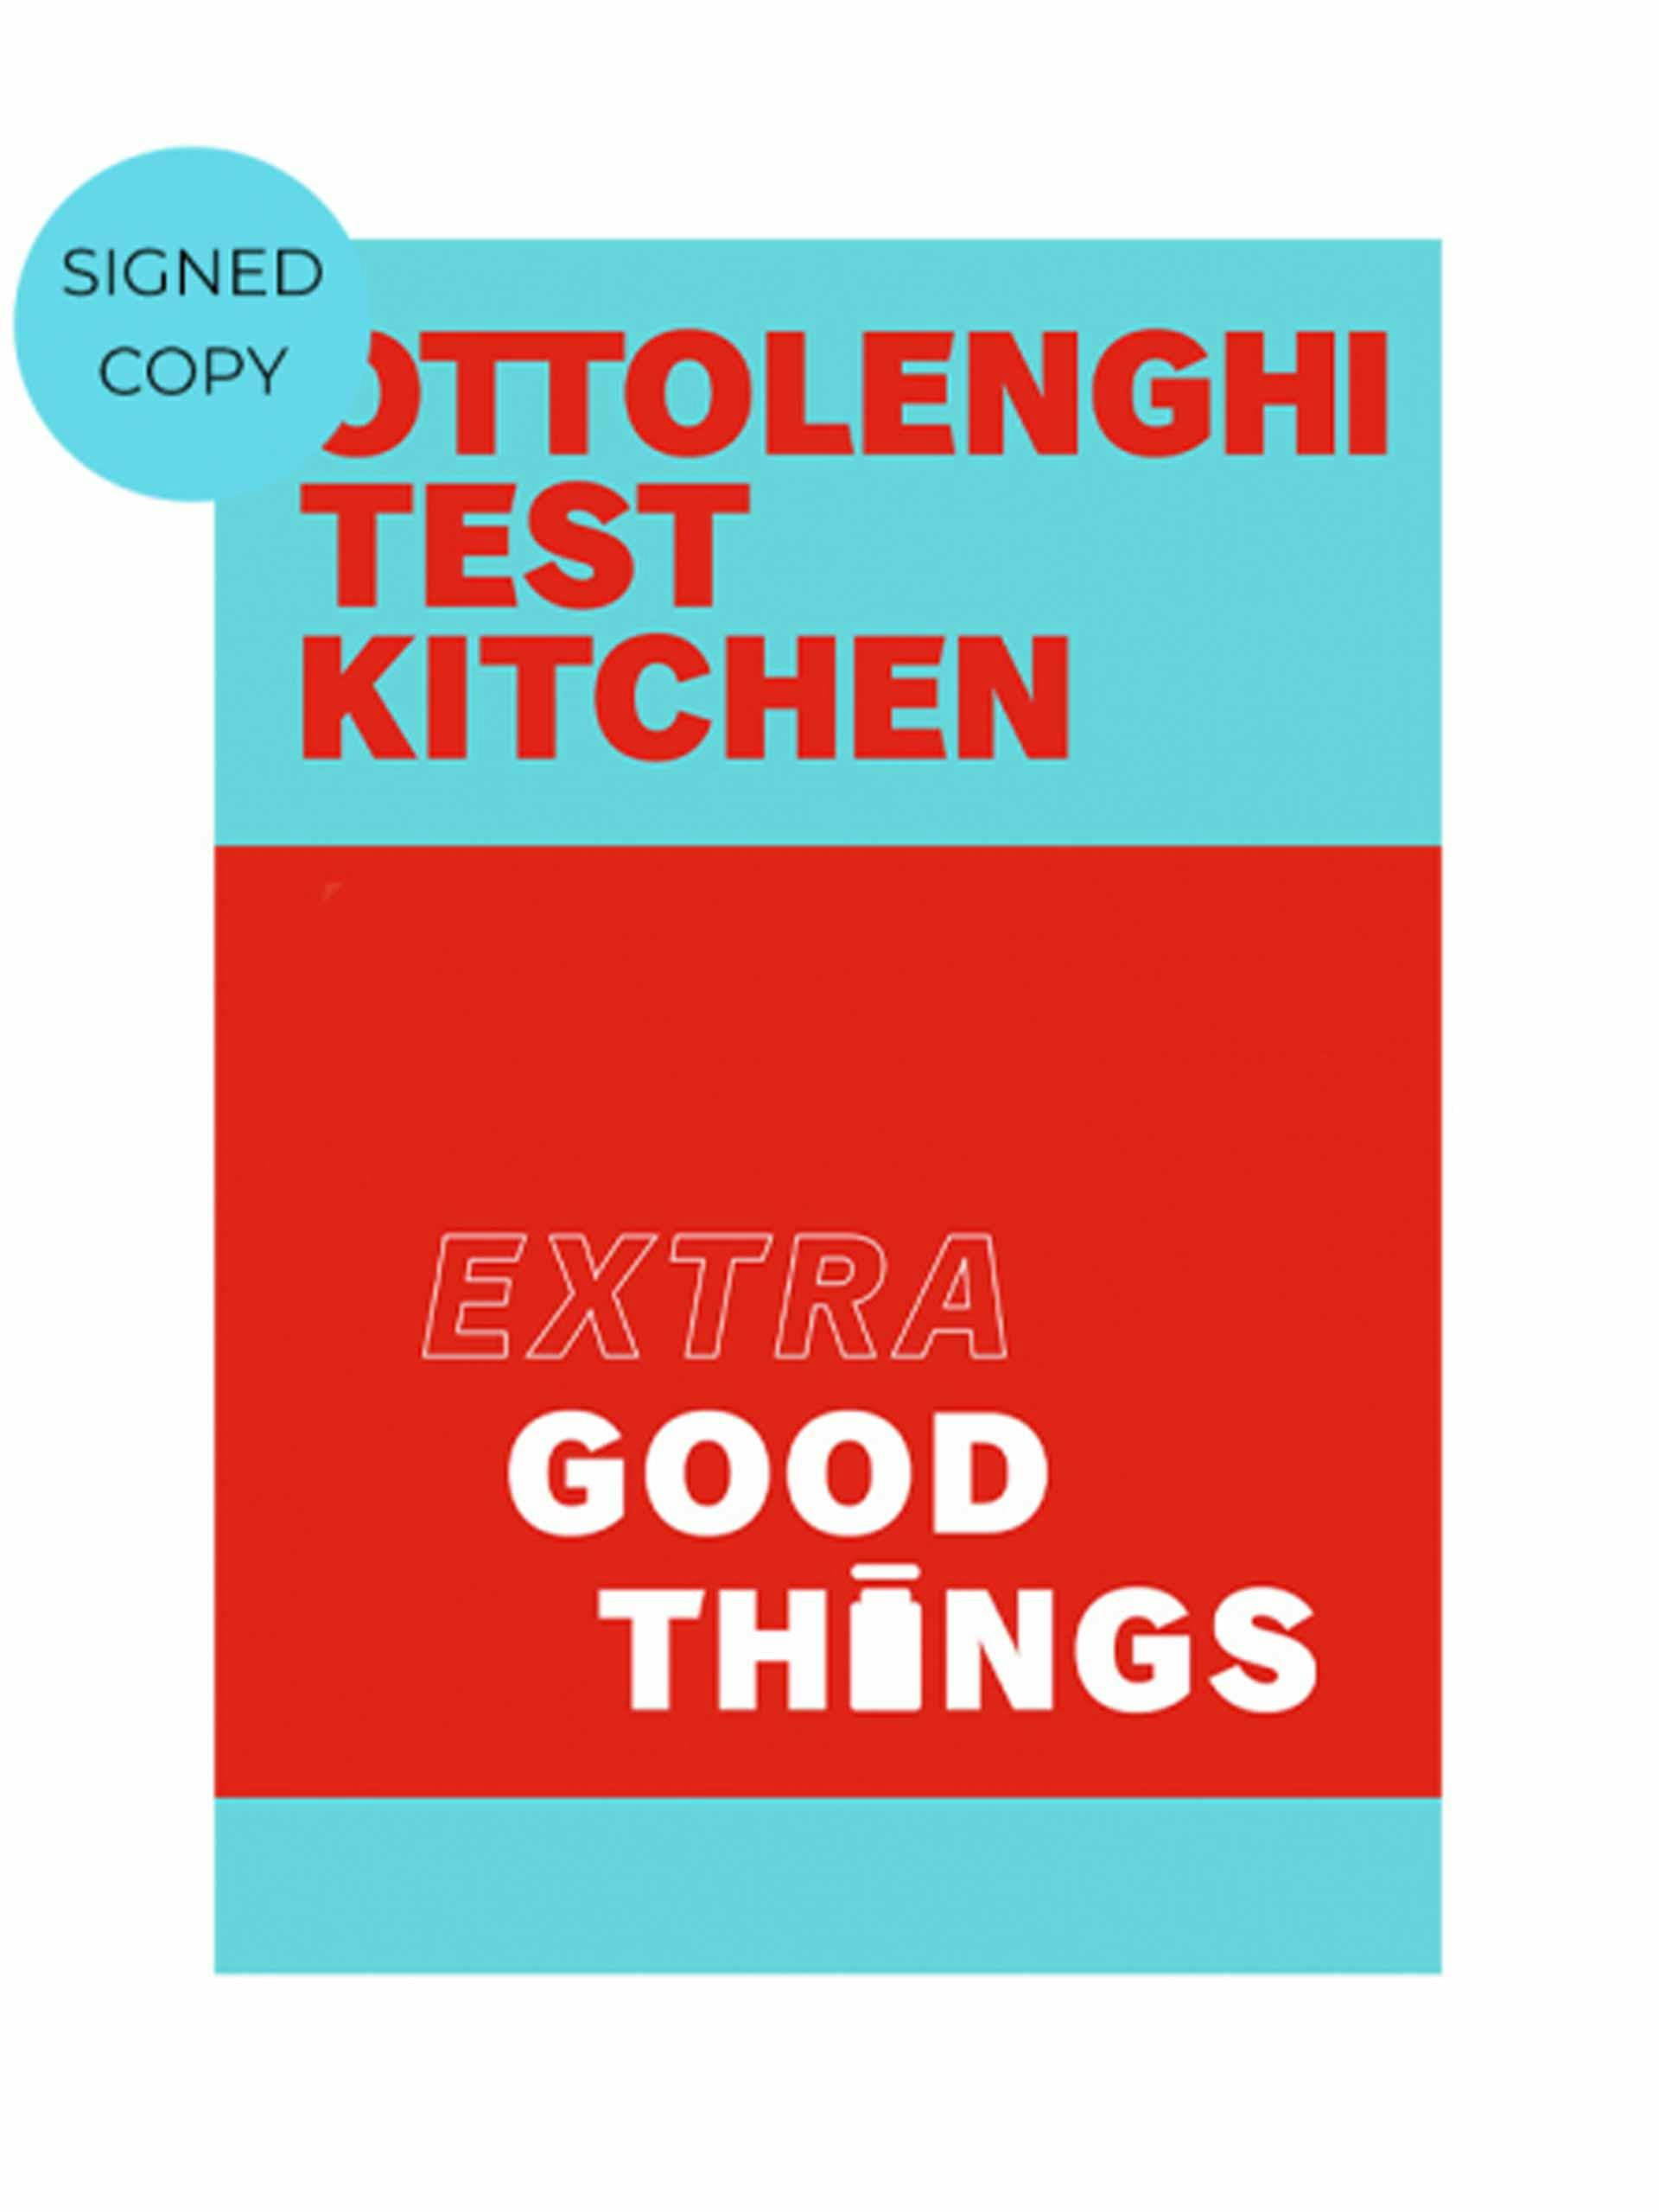 Extra Good Things by Ottolenghi Test Kitchen (signed copy)